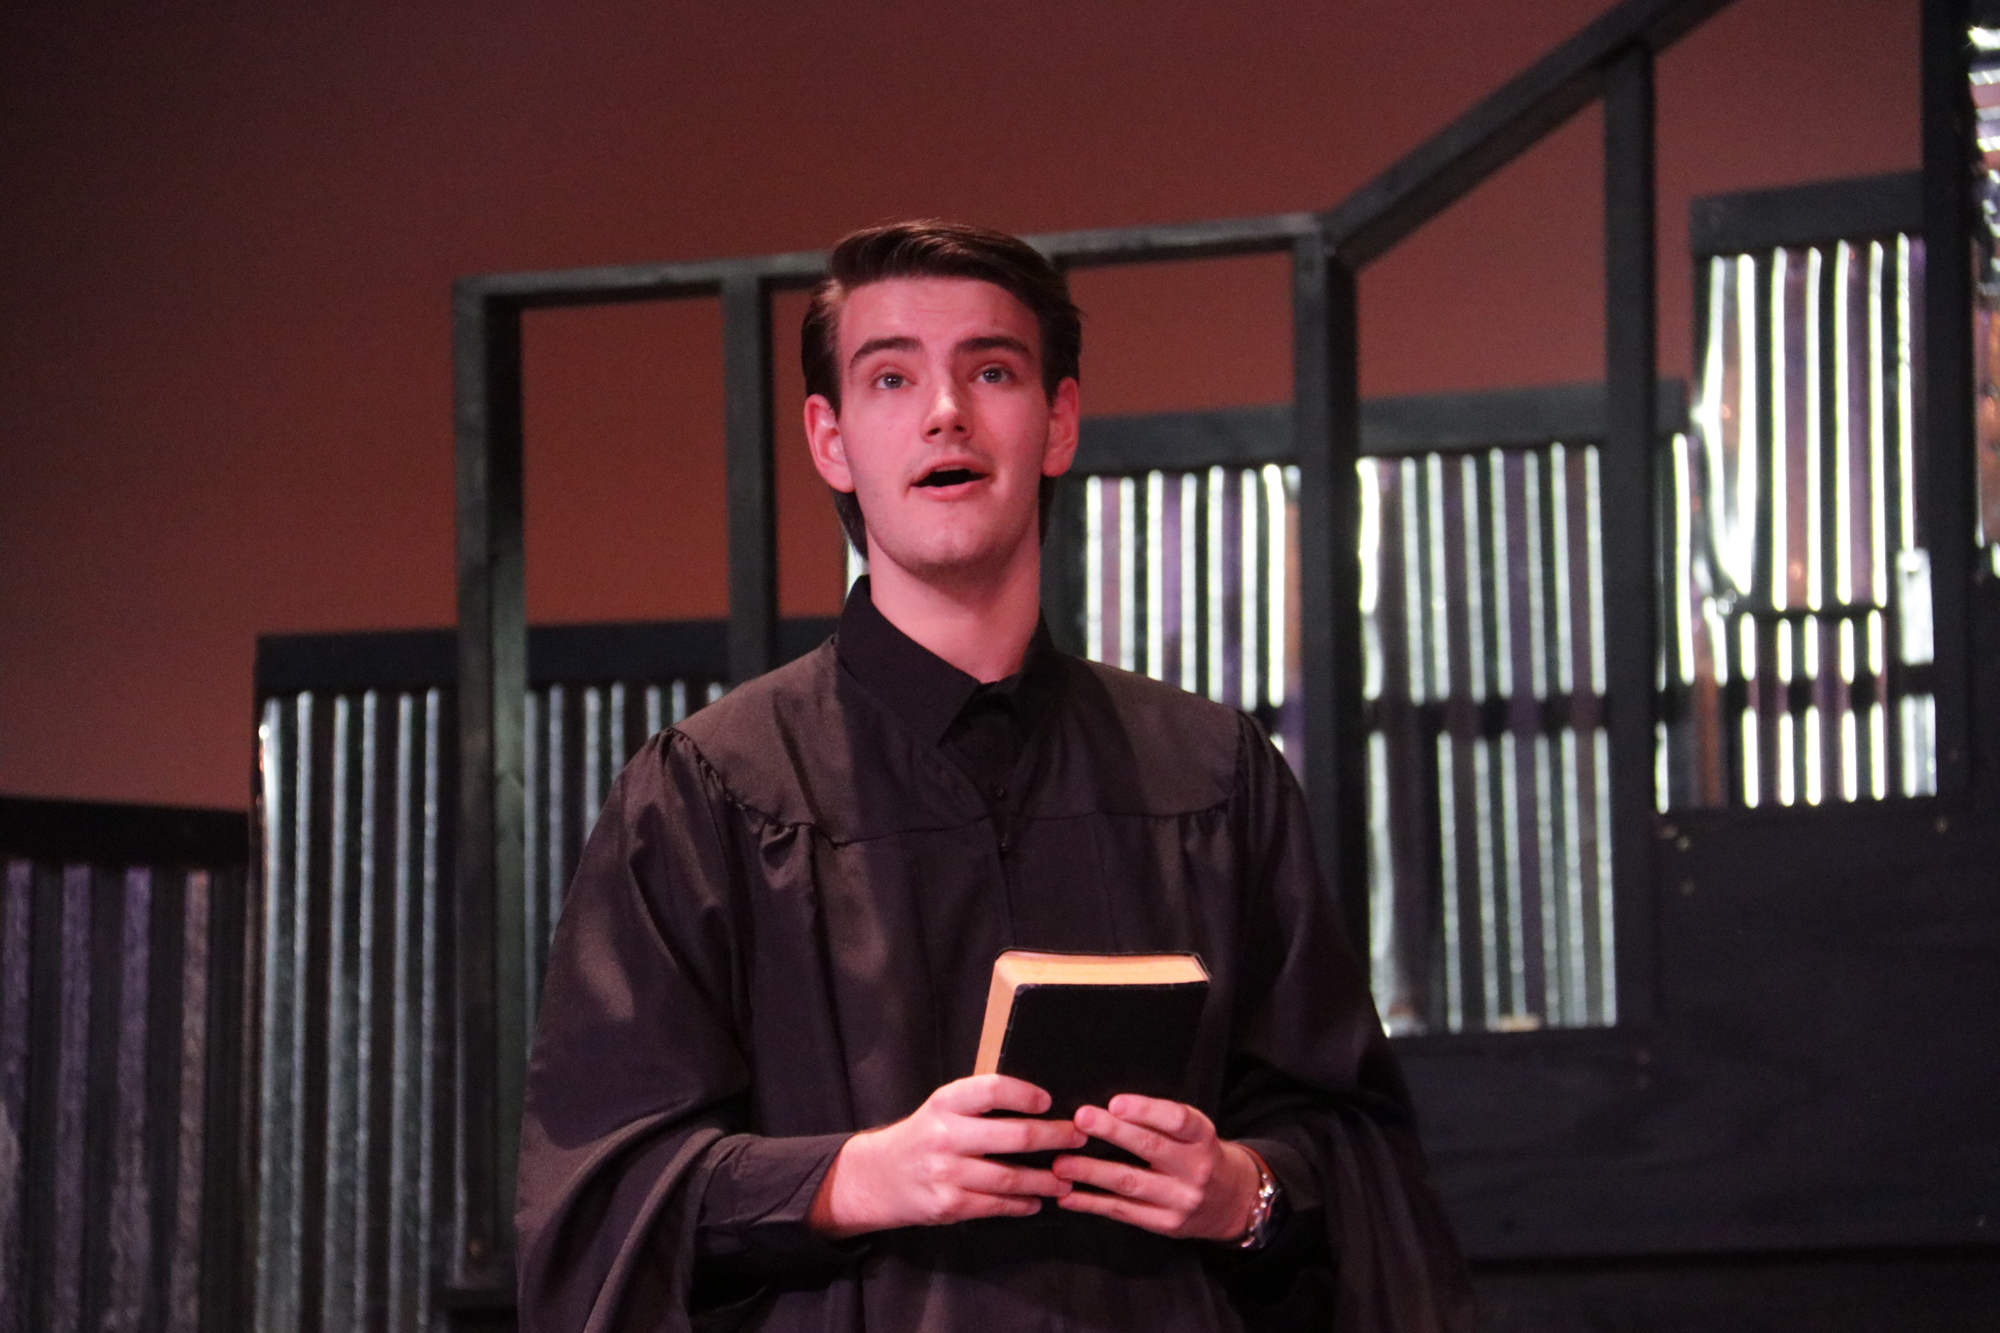 Blake Croft played the Rev. Shaw Moore in WHS theater’s production of “Footloose: The Musical” in October. He won the award for Best Actor in a Male Role at the Florida Theatre Conference for his role in “The Arkansaw Bear.”